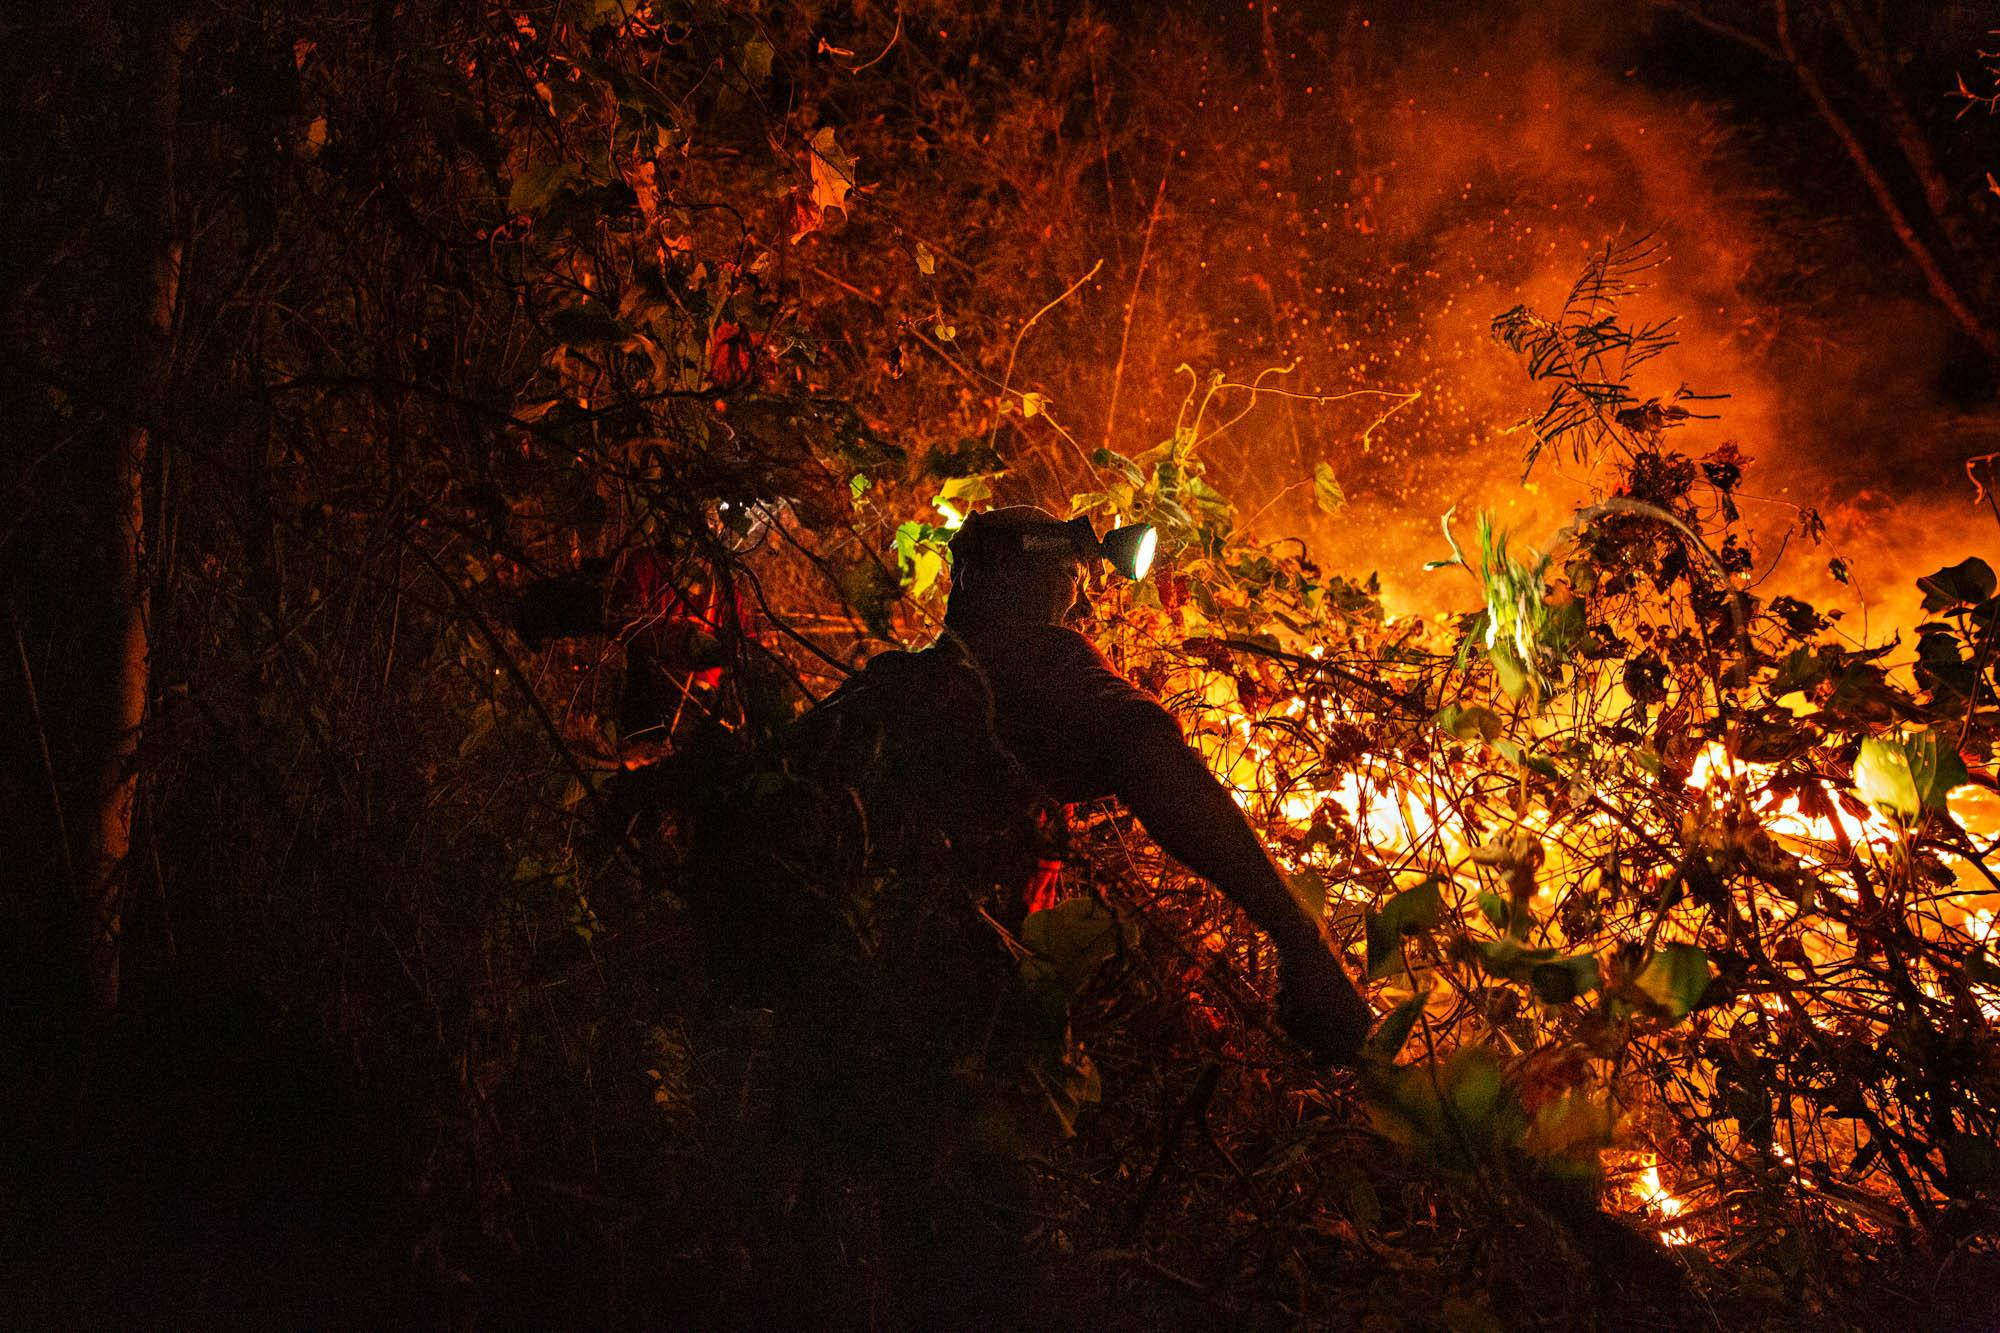 Thailand Burns - A fire fighter from Doi Mae Salong fire station works to...